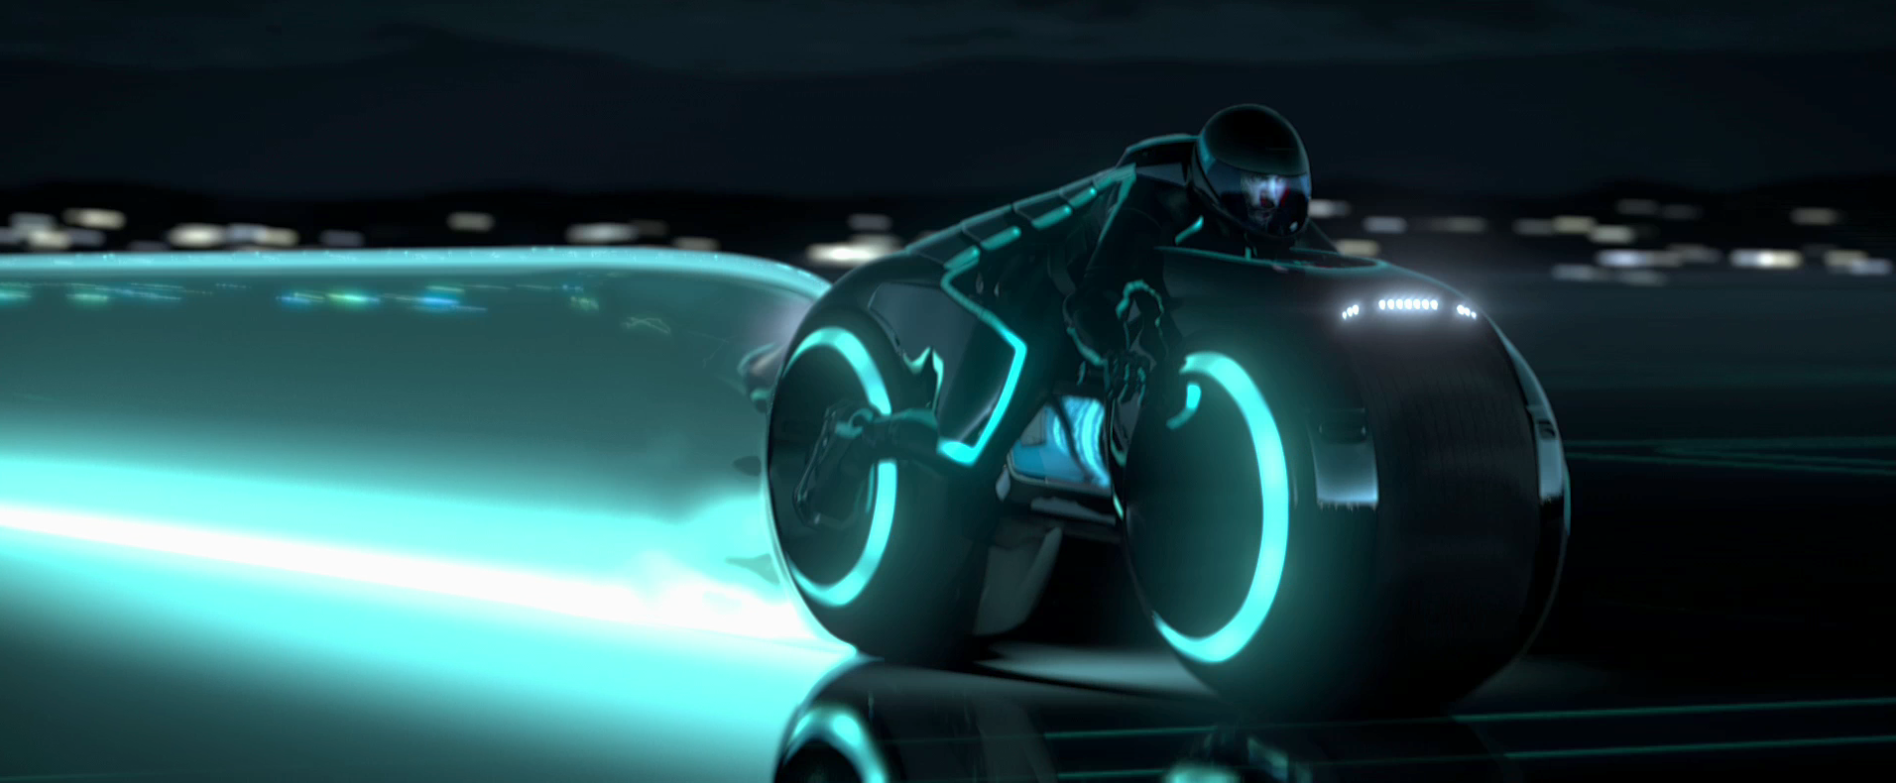 Tron Legacy Light Cycle wallpaper   Click picture for high resolution